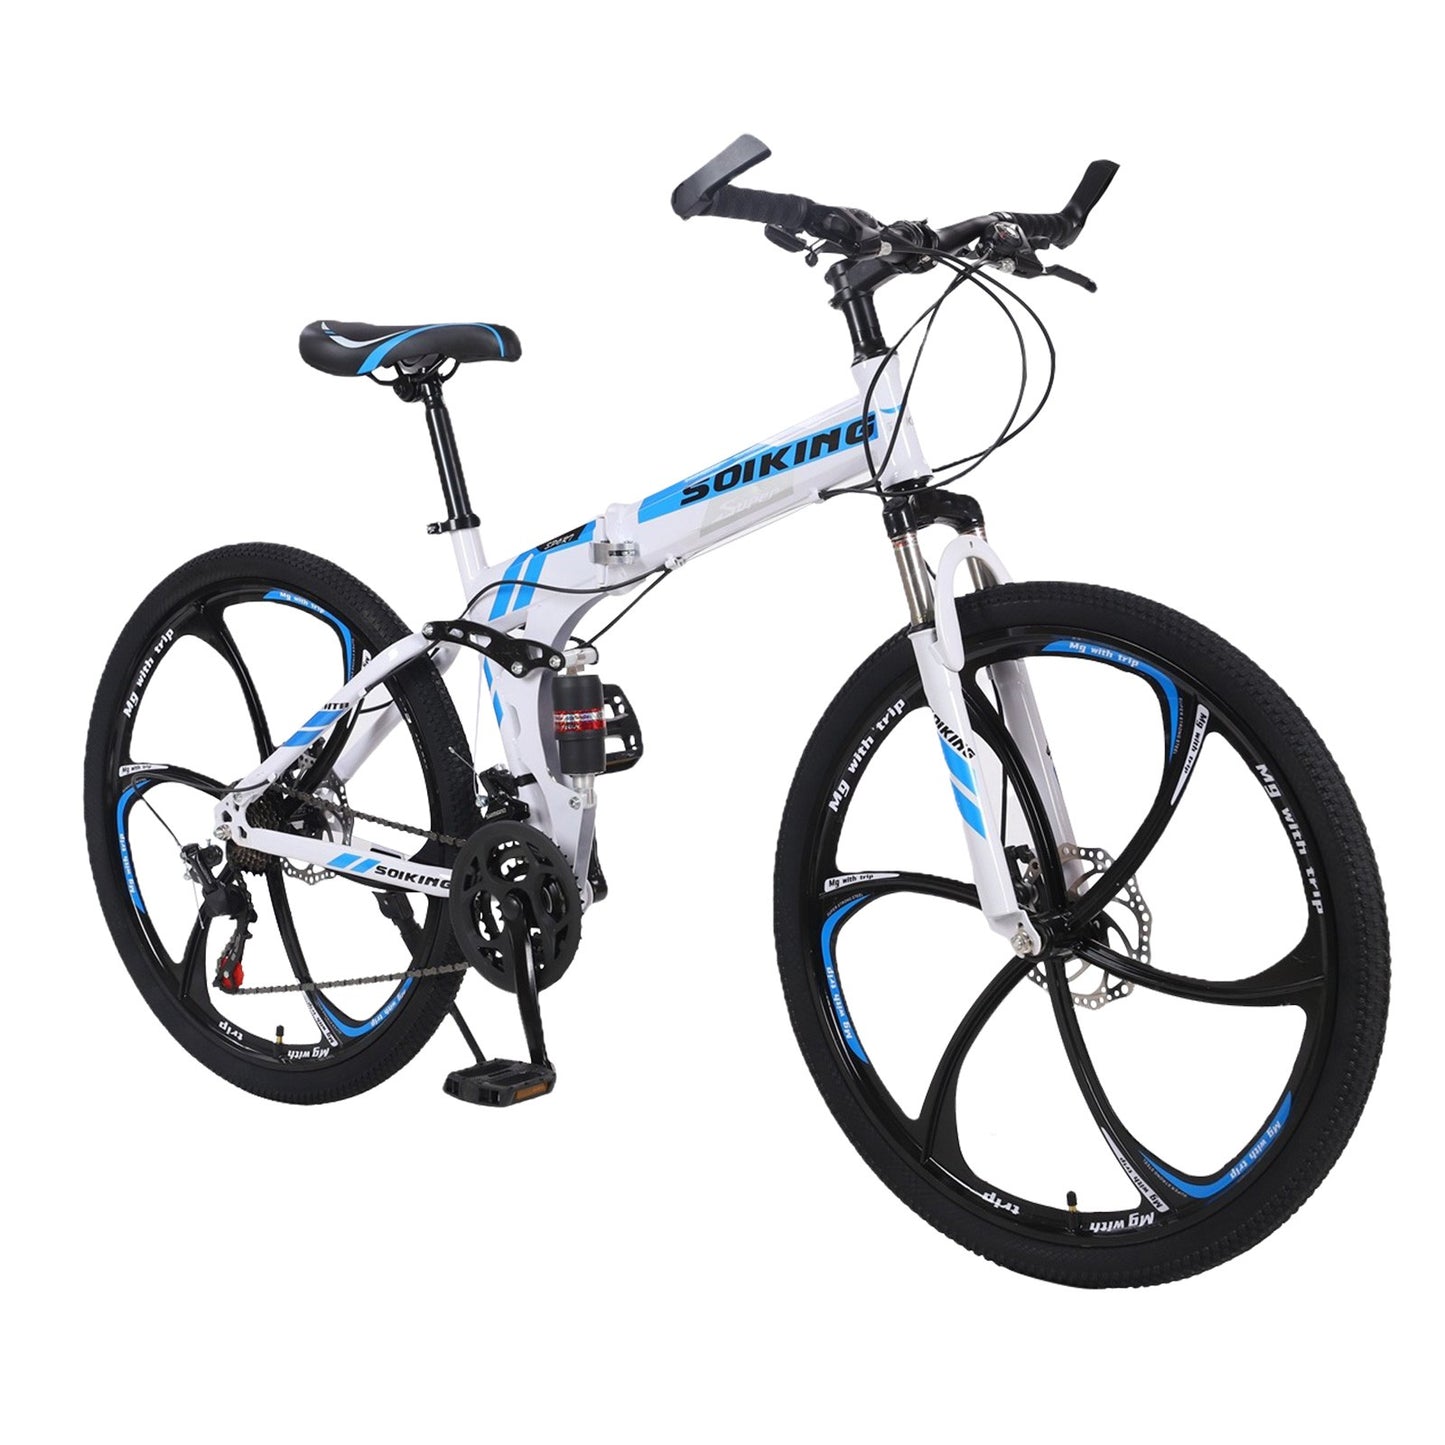 26in Folding Mountain bike with full suspension